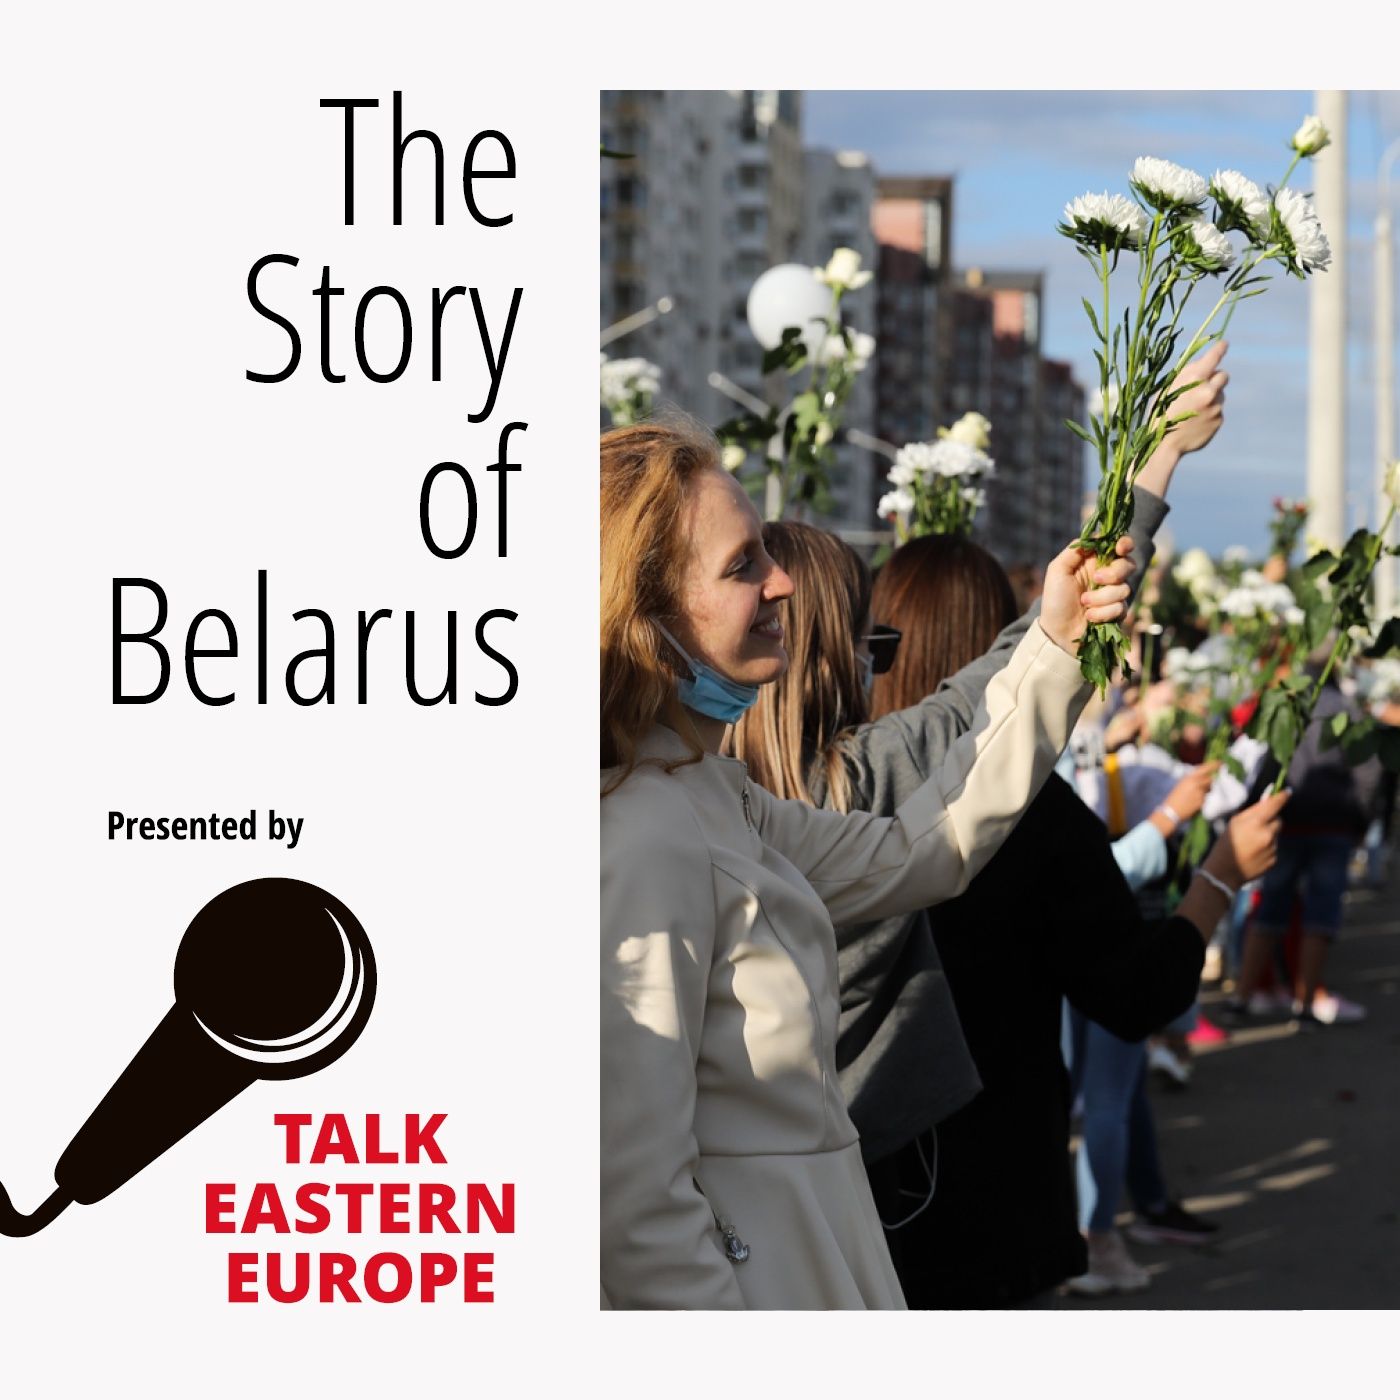 Introducing The Story of Belarus. The nation, its history and a new hope